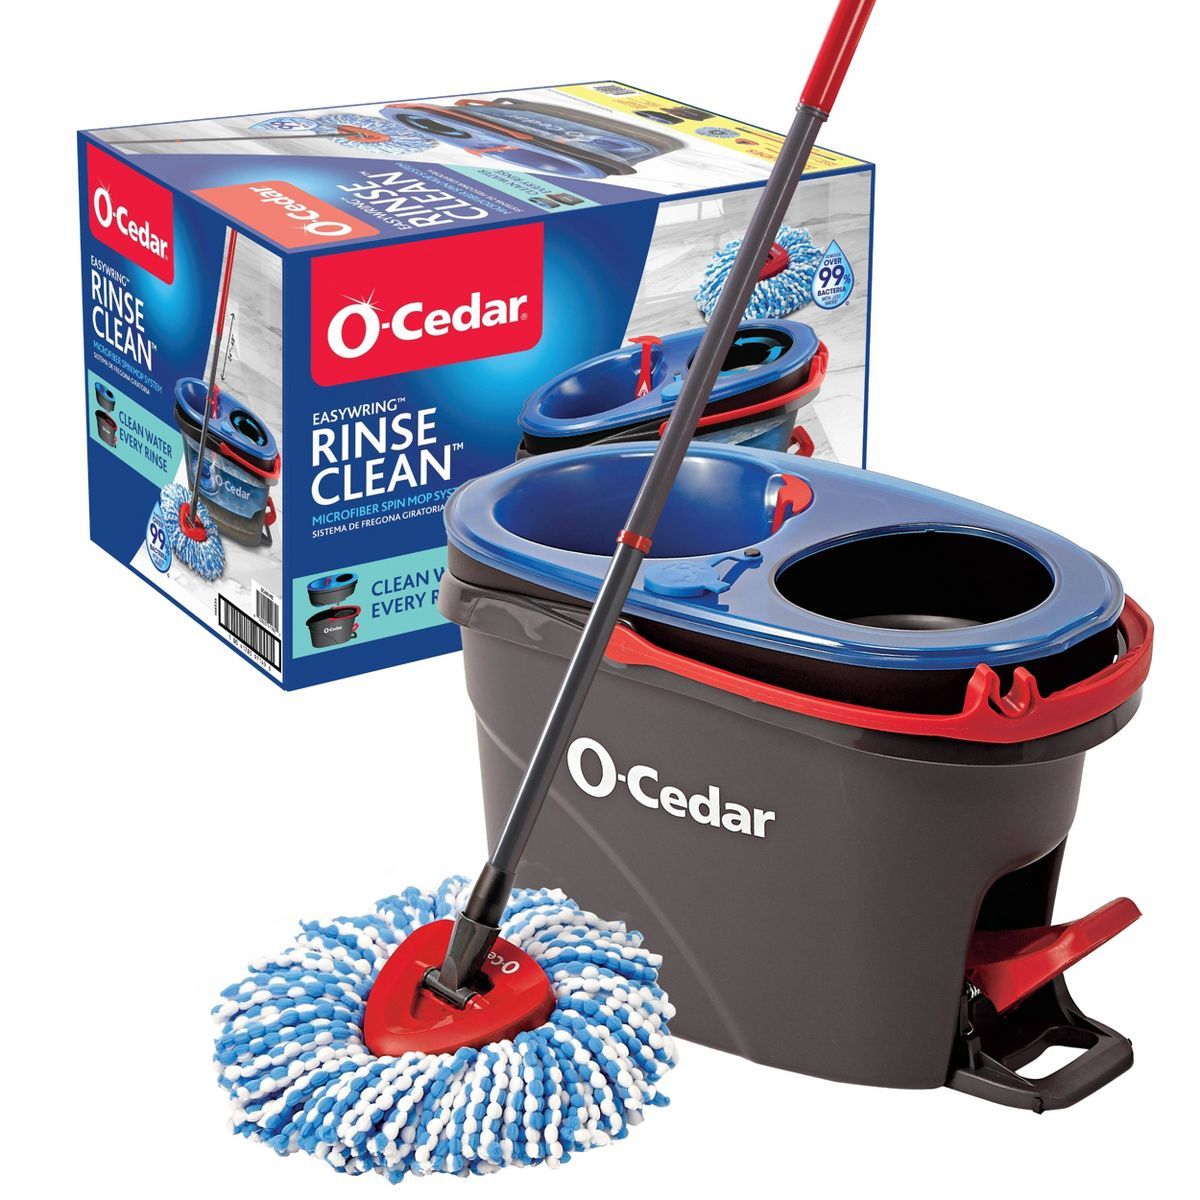 O-Cedar EasyWring RinseClean Spin Mop & Bucket System | Target